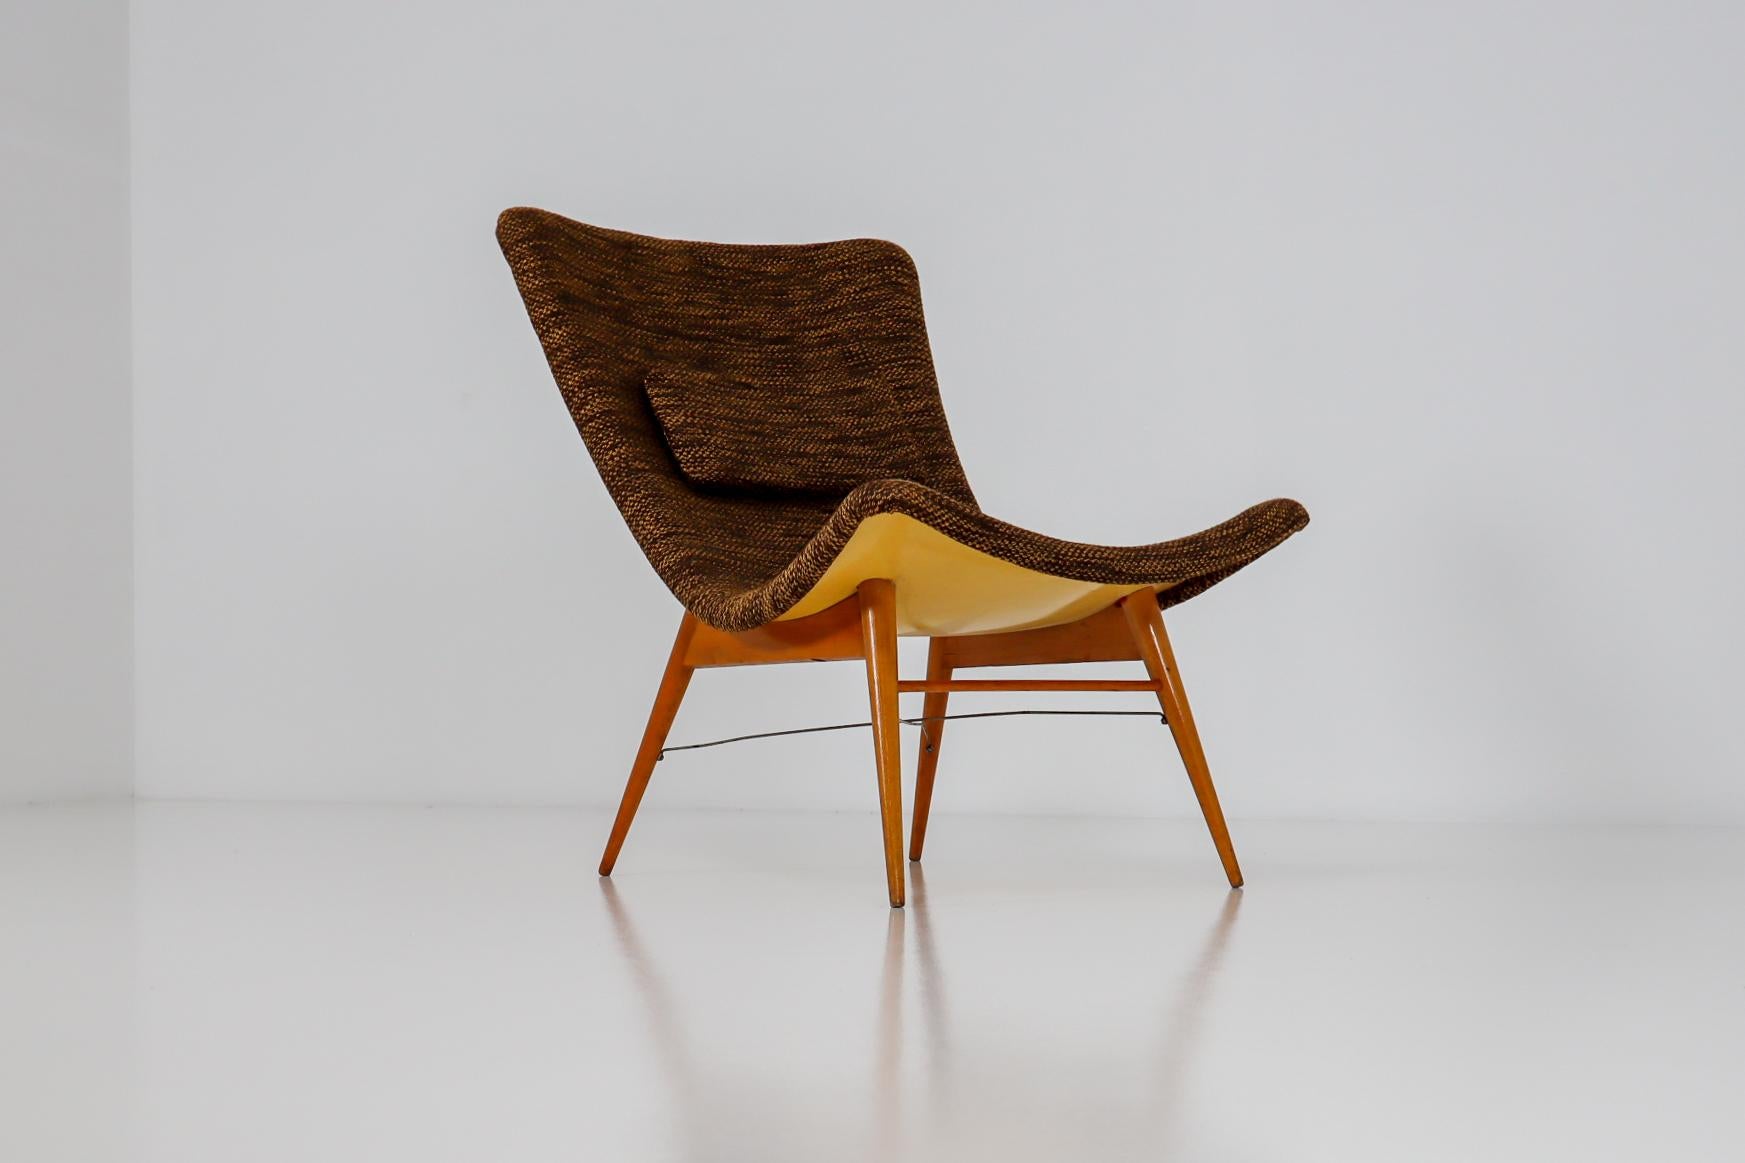 Lounge chairs by Miroslav Navratil, manufactured in former Czechoslovakia by Cesky Nabytek, 1959. Original wooden base, fiberglass shell seating. The backside of the chair is original yellow color and have a new Reupholstered fabric in brown color.